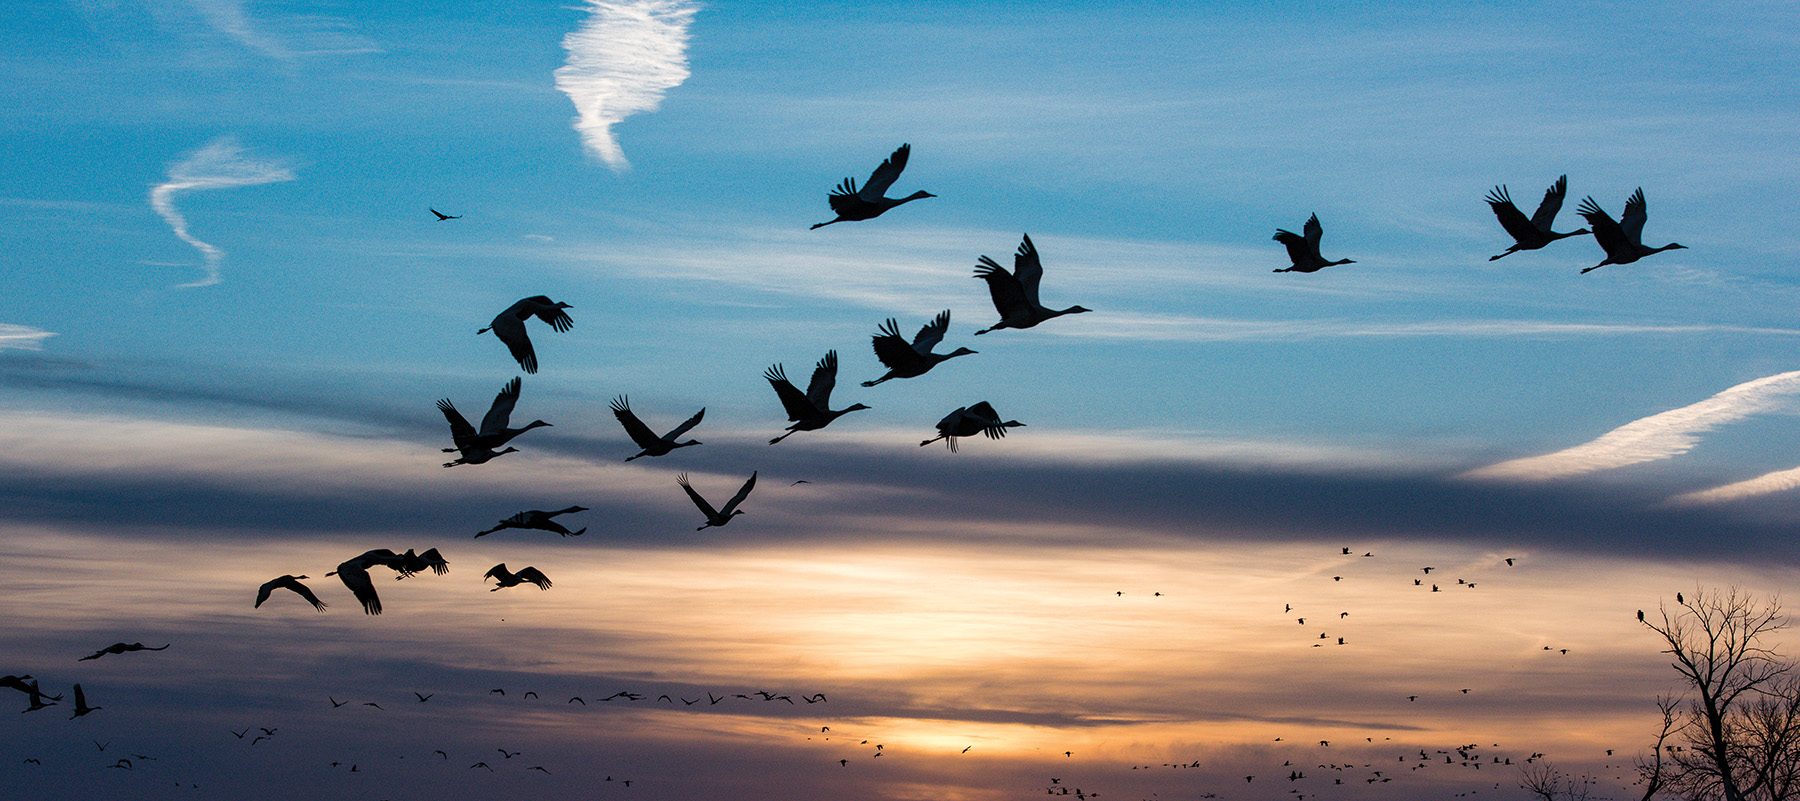 Sandhill cranes fly from their roost on the Platte River in Hall County at sunrise during their annual stopover in their northward spring migration.